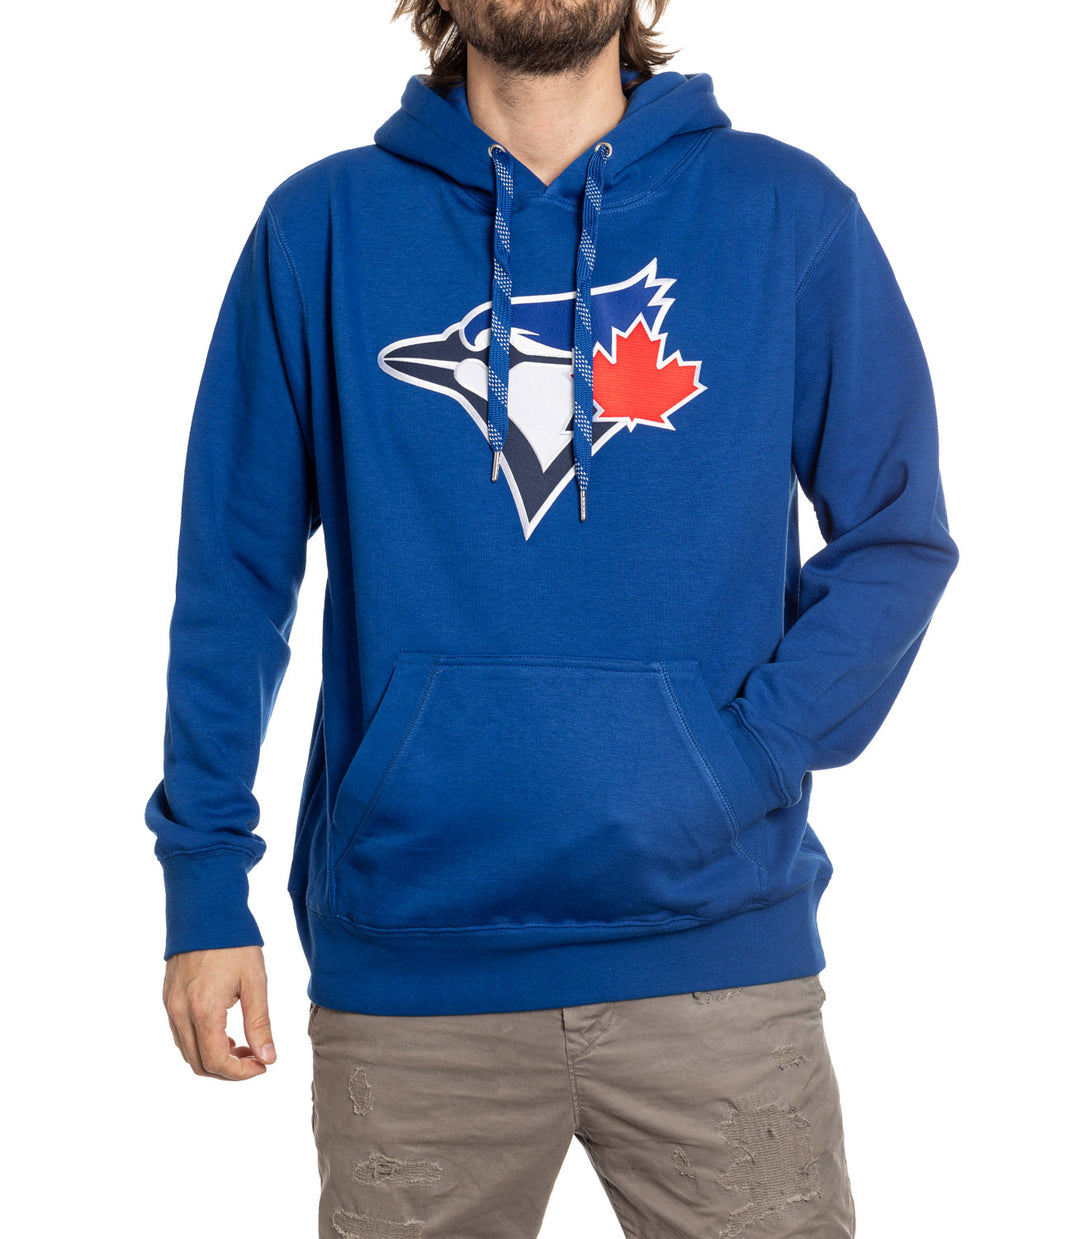 Calhoun Store - Blue Jays are back in stock!! Come on into Calhoun  Sportswear and pick yourself up a new Blue Jays t-shirt, tank top, socks or  hoodie. #calhoun #calhounsportswear #torontobluejays #gojaysgo⚾️💙 #